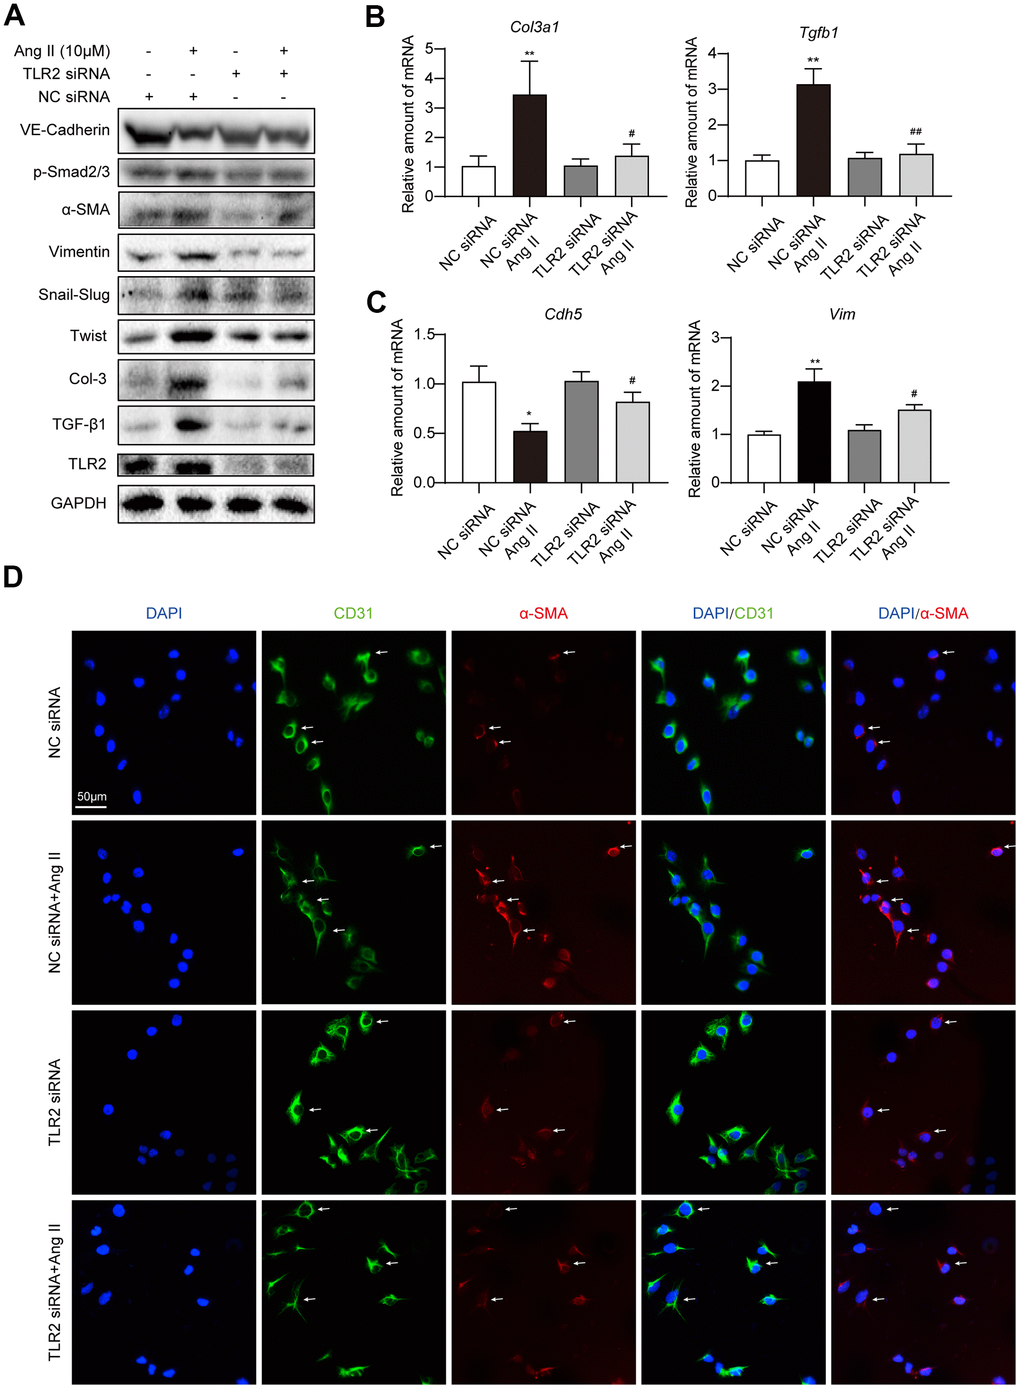 Silencing TLR2 prevents EndMT phenotype in cultured endothelial cells. (A) HUVECs were transfected with siRNA against TLR2. Control cells were transfected with negative control (NC) siRNA. Cells were then challenged with 10 μM Ang II for 36 h. Total proteins were probed for TLR2 and EndMT-associated proteins. GAPDH was used as loading control. (B, C) HUVECs were exposed to 10 μM Ang II for 24 h, after siRNA transfections. mRNA levels of EndMT-associated genes were determined. Data was normalized to β-actin. (D) Representative immunofluorescence staining of HUVECs for CD31 (green) and α-SMA (red). Cells were transfected with indicated siRNA and then exposed to 10 μM Ang II for 36 h. Slides were counterstained with DAPI (blue). Arrows indicate HUVECs undergoing EndMT, as evident through loss of CD31 and induction of α-SMA [Scale bar = 50 μm]. [n = 3; Data shown as Mean ± SEM; *p